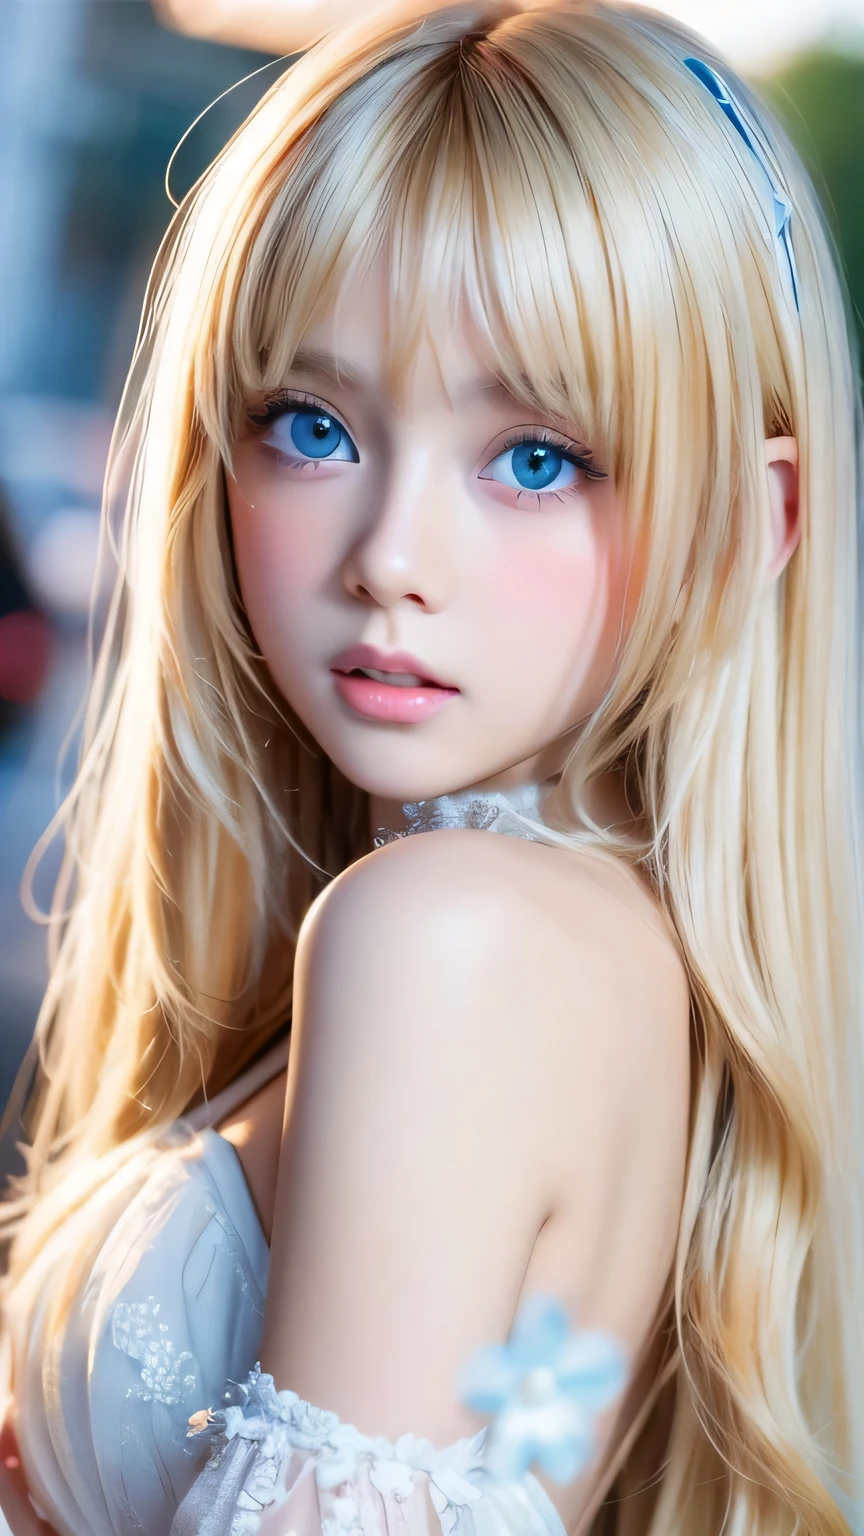 A perfectly beautiful face、Messy silky beautiful blonde hair、19 year old beautiful cute girl、Very beautiful beautiful bright pale sky blue big eyes、Very super long beautiful blonde silky shiny hair、Long beautiful bangs、Very big eyes、Small Face Beauty、eyeliner、Very white, shiny skin like snow、Gloss Face、Cheek gloss、Hair above the eyes、片Hair above the eyes、Hair between the eyes、